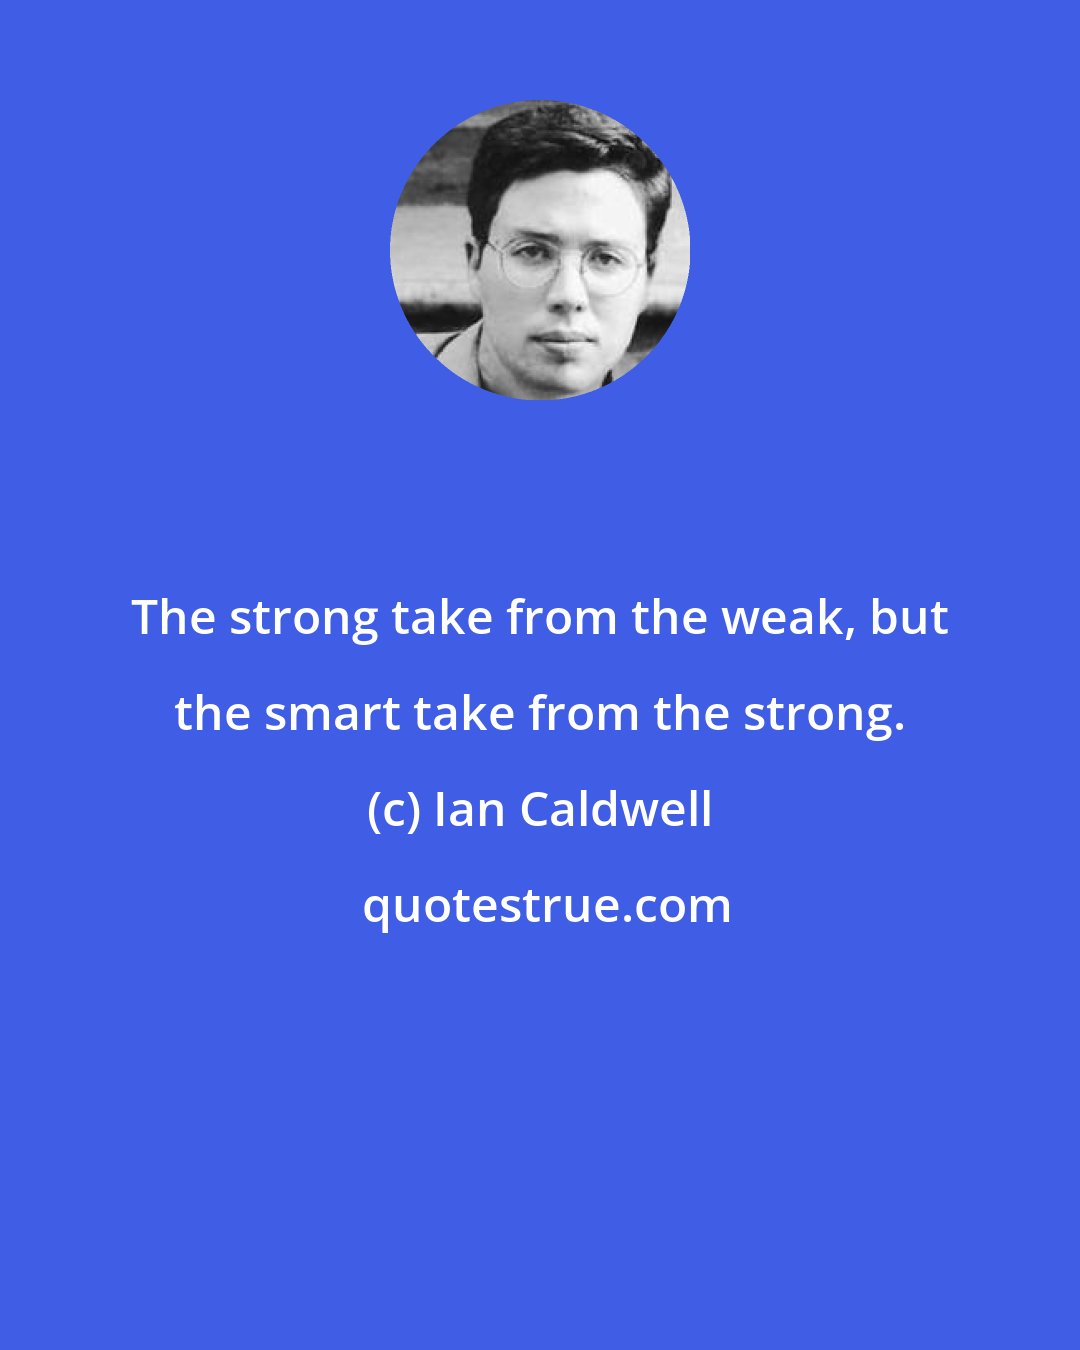 Ian Caldwell: The strong take from the weak, but the smart take from the strong.